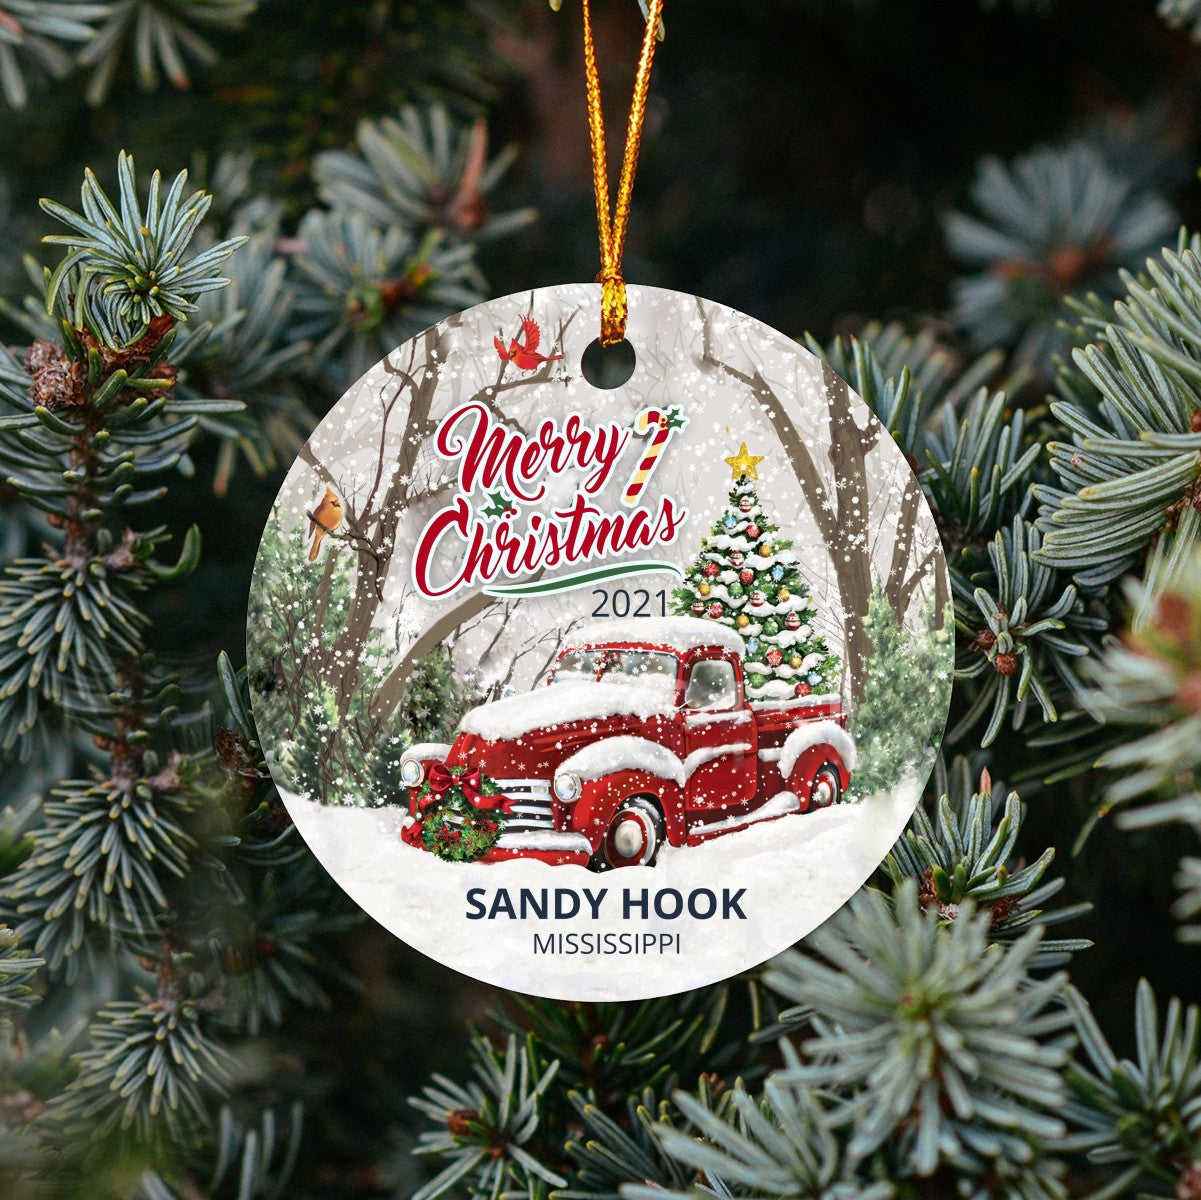 Christmas Tree Ornaments Sandy Hook - Ornament With Name City, State Sandy Hook Mississippi MS Ornament - Red Truck Xmas Ornaments 3'' Plastic Gift For Family, Friend And Housewarming